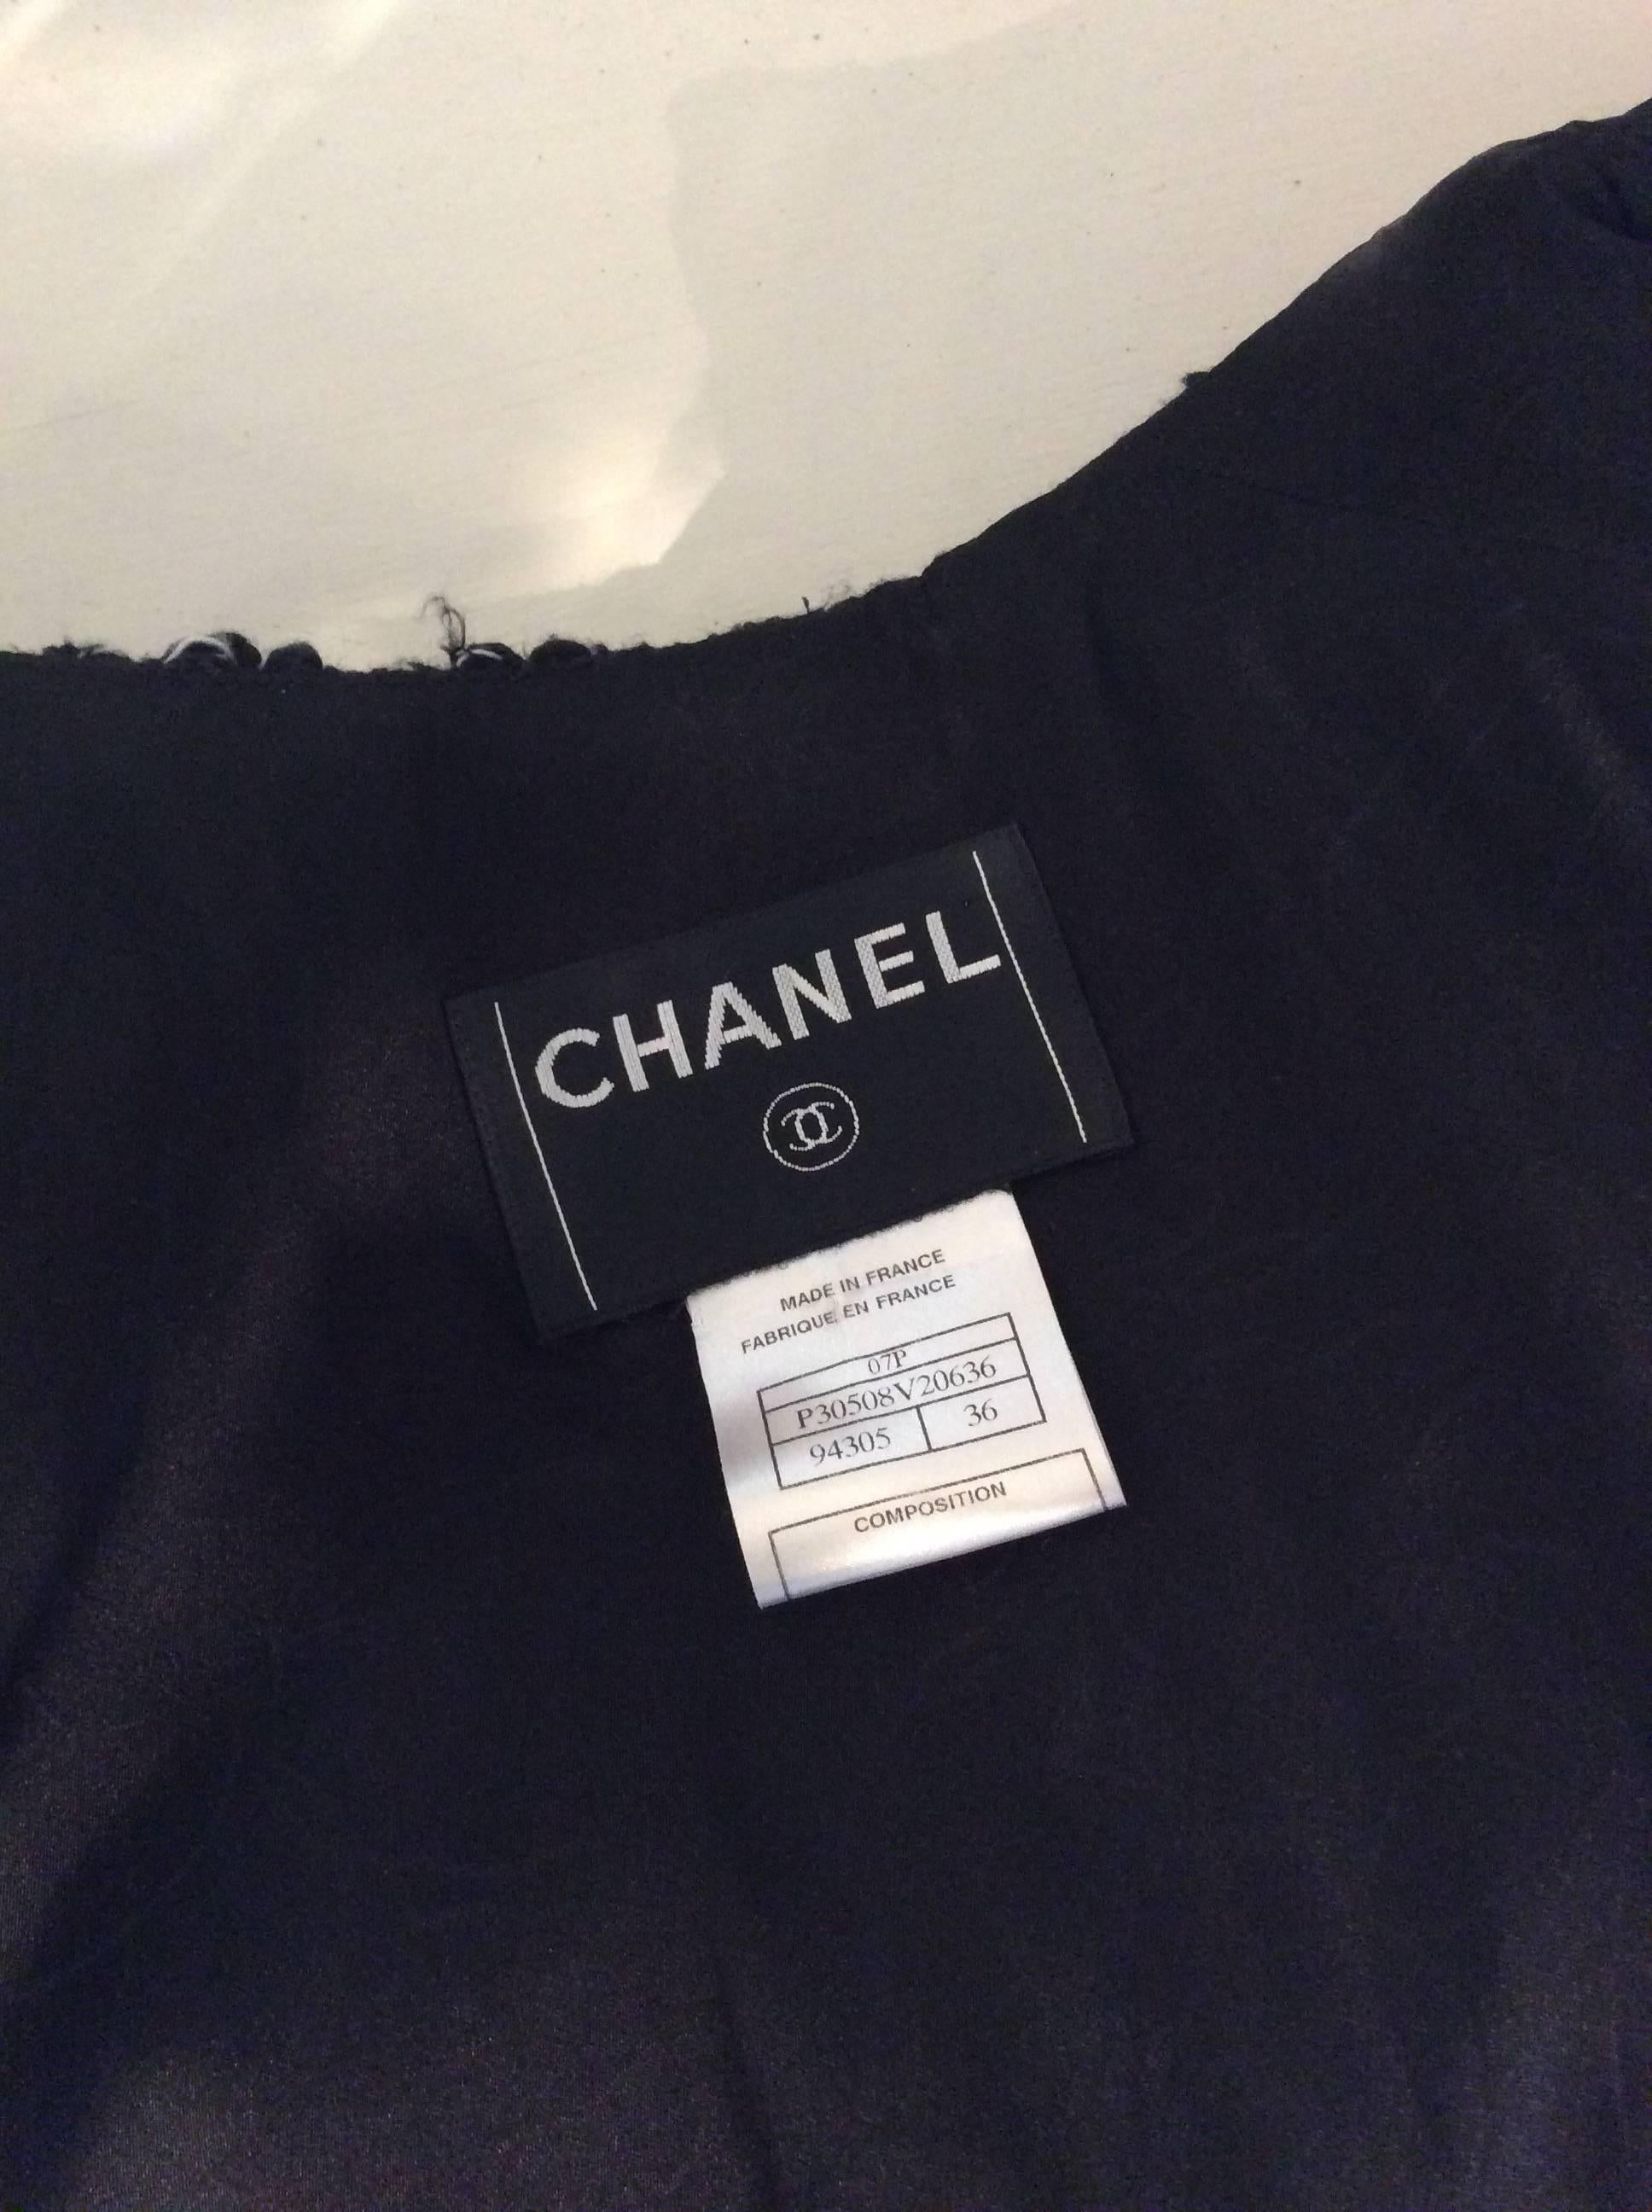 Chanel Black Tweed Coat W/ Braided Trim, Pearl and Black Enamel Buttons Sz36/Us4 For Sale 3